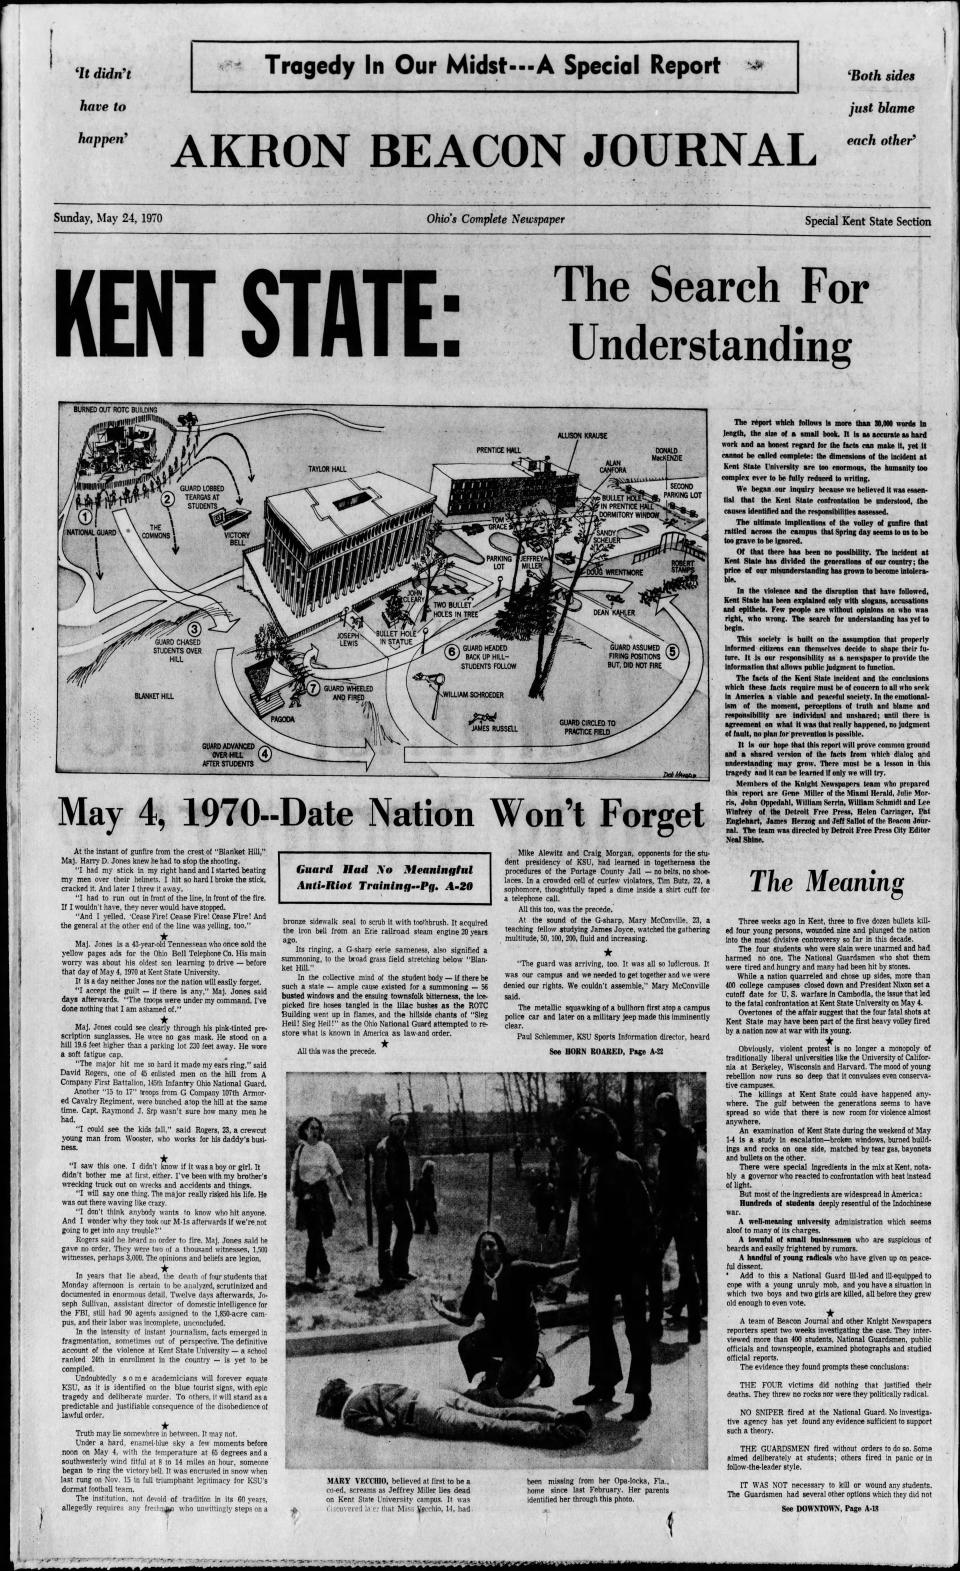 John Filo’s photo of a girl kneeling over the body of a Kent State protester is republished May 24, 1970, in the Akron Beacon Journal.